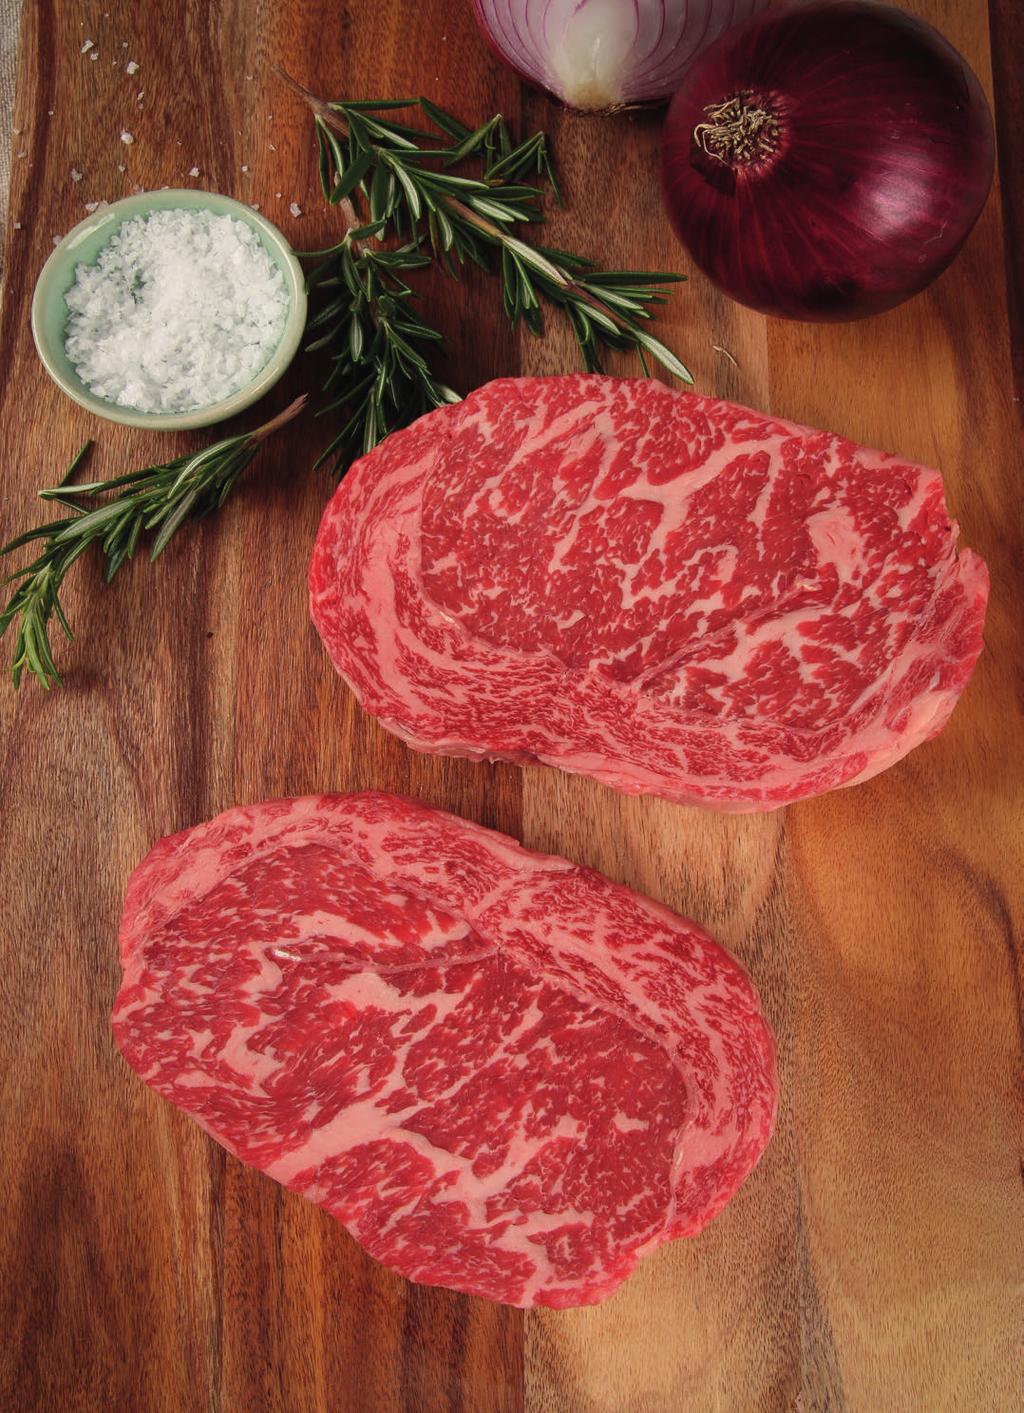 THE JUICY DETAILS Characteristics of Wagyu Beef Product Specifications Highest quality beef in the world Renowned for its distinctive marbling and flavor Contains Omega 3 and Omega Increased marbling